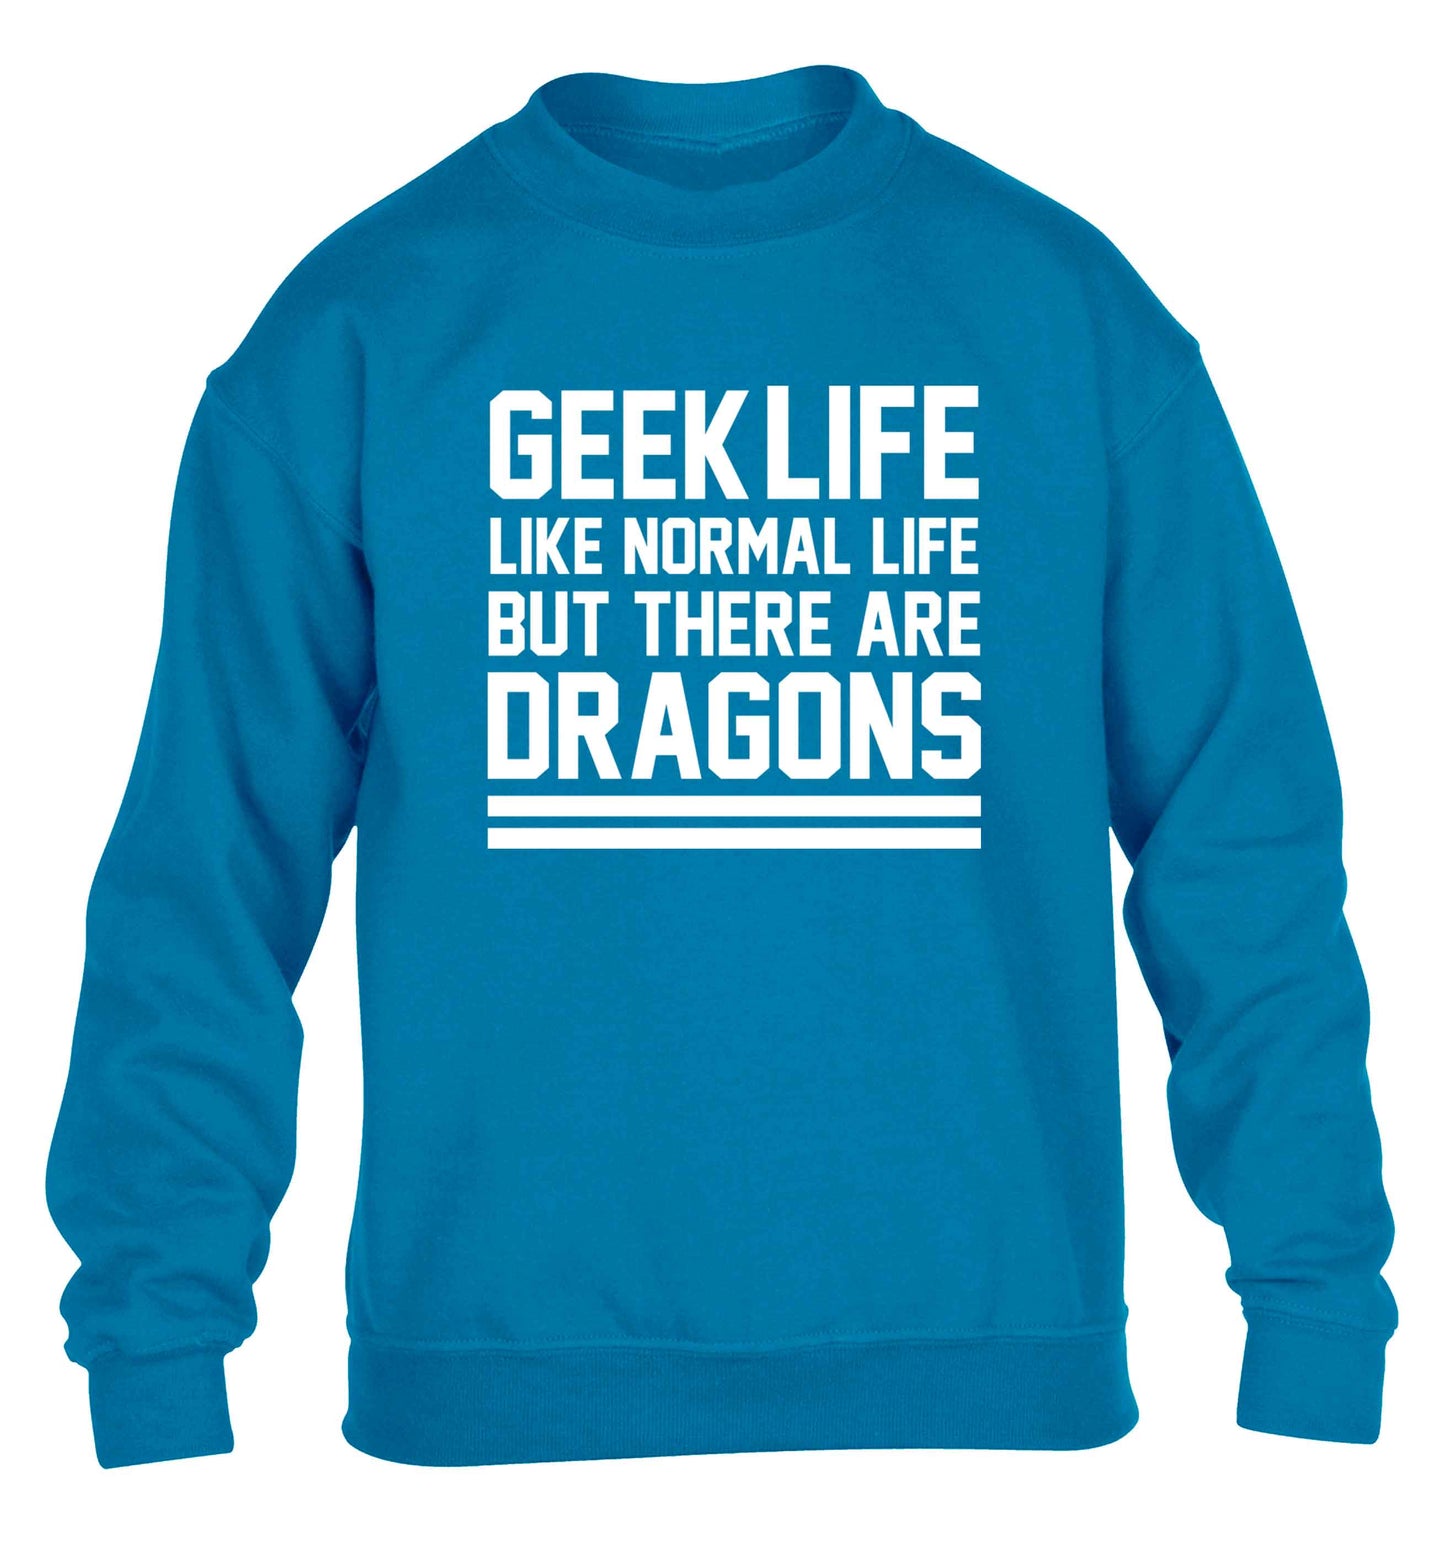 Geek life like normal life but there are dragons children's blue sweater 12-13 Years